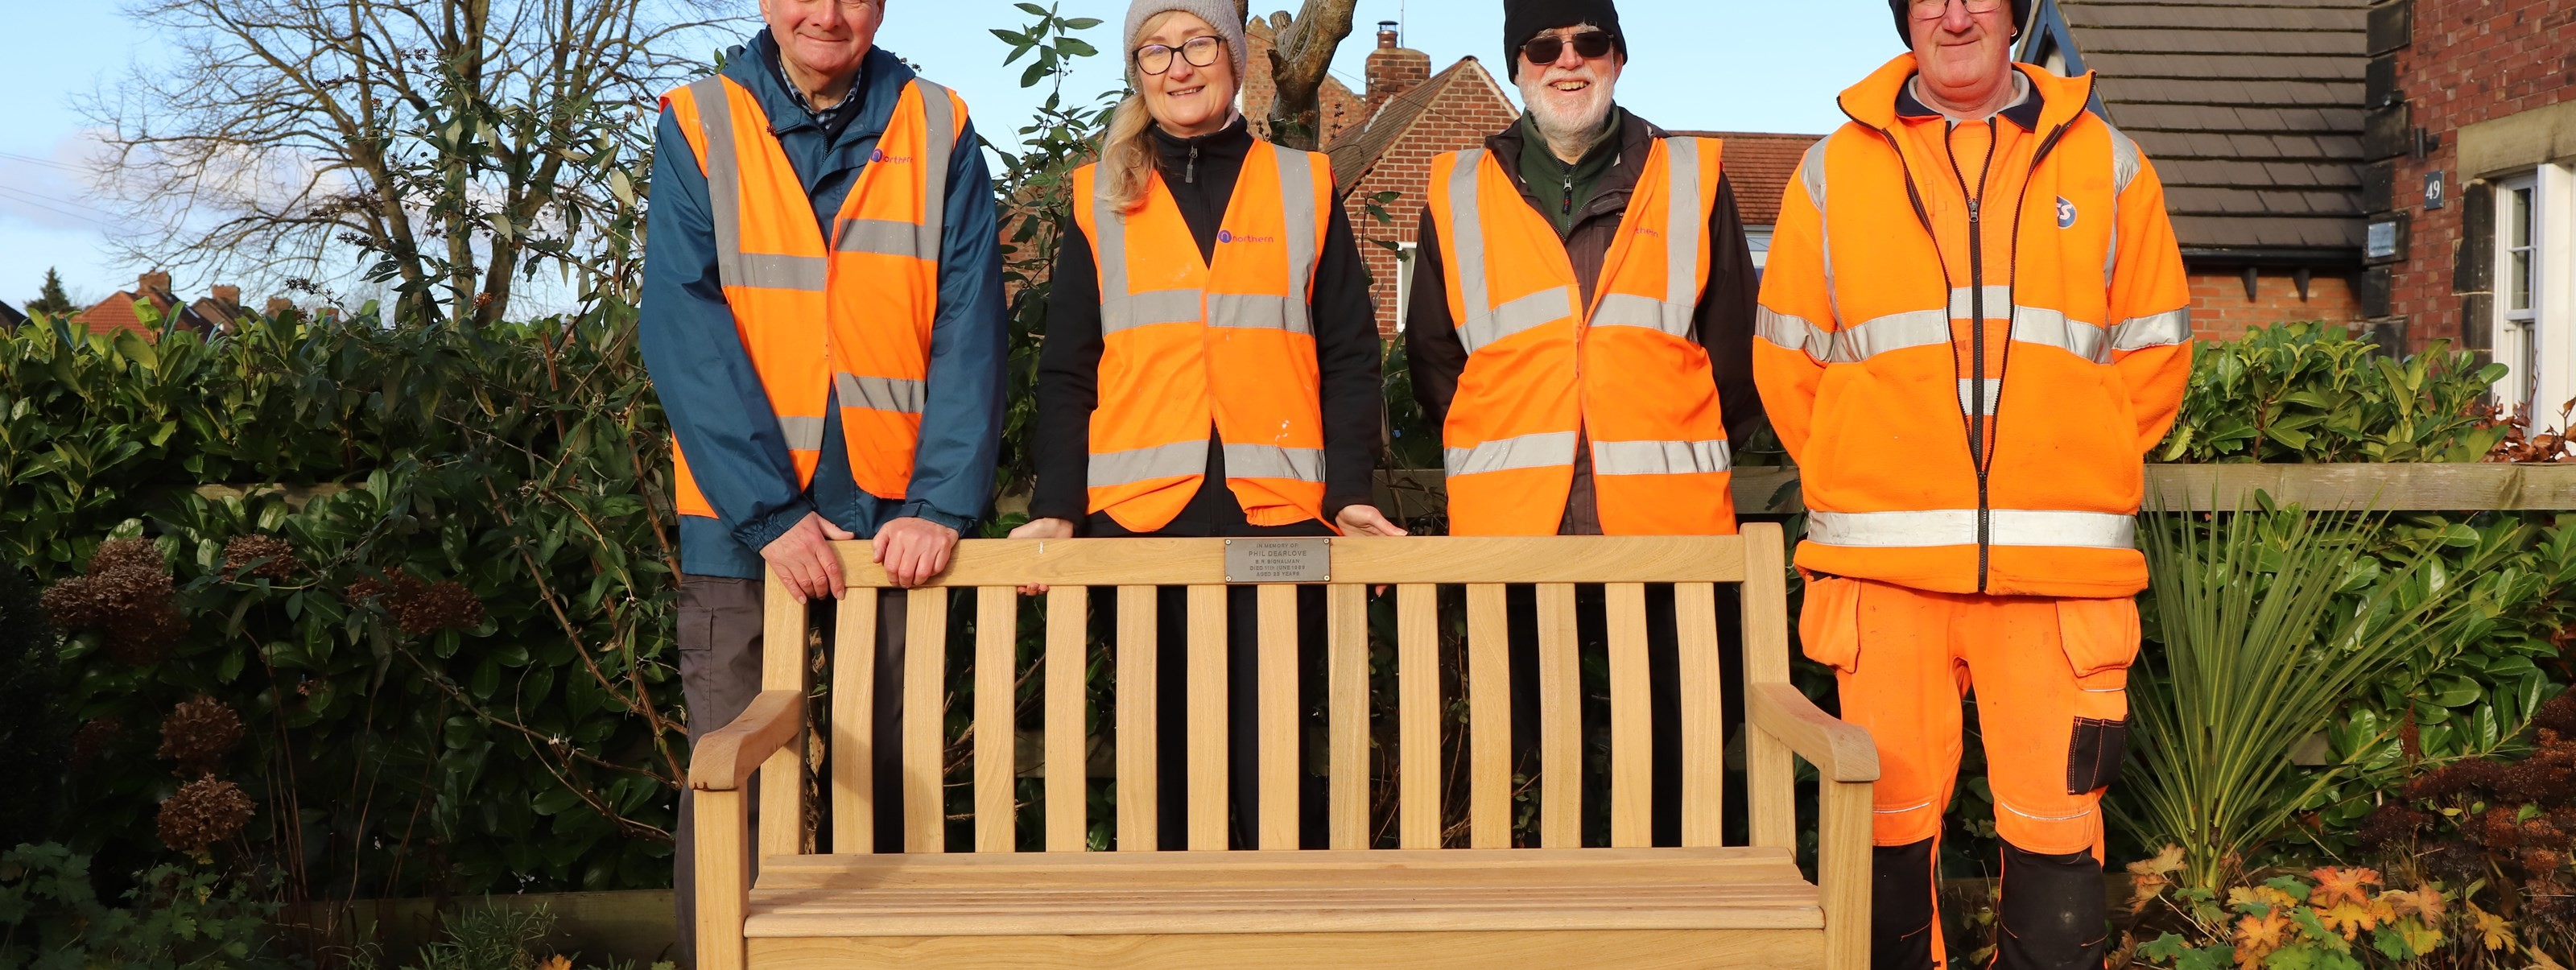 this-image-shows-the-poppleton-memorial-bench-alongside-station-volunteers